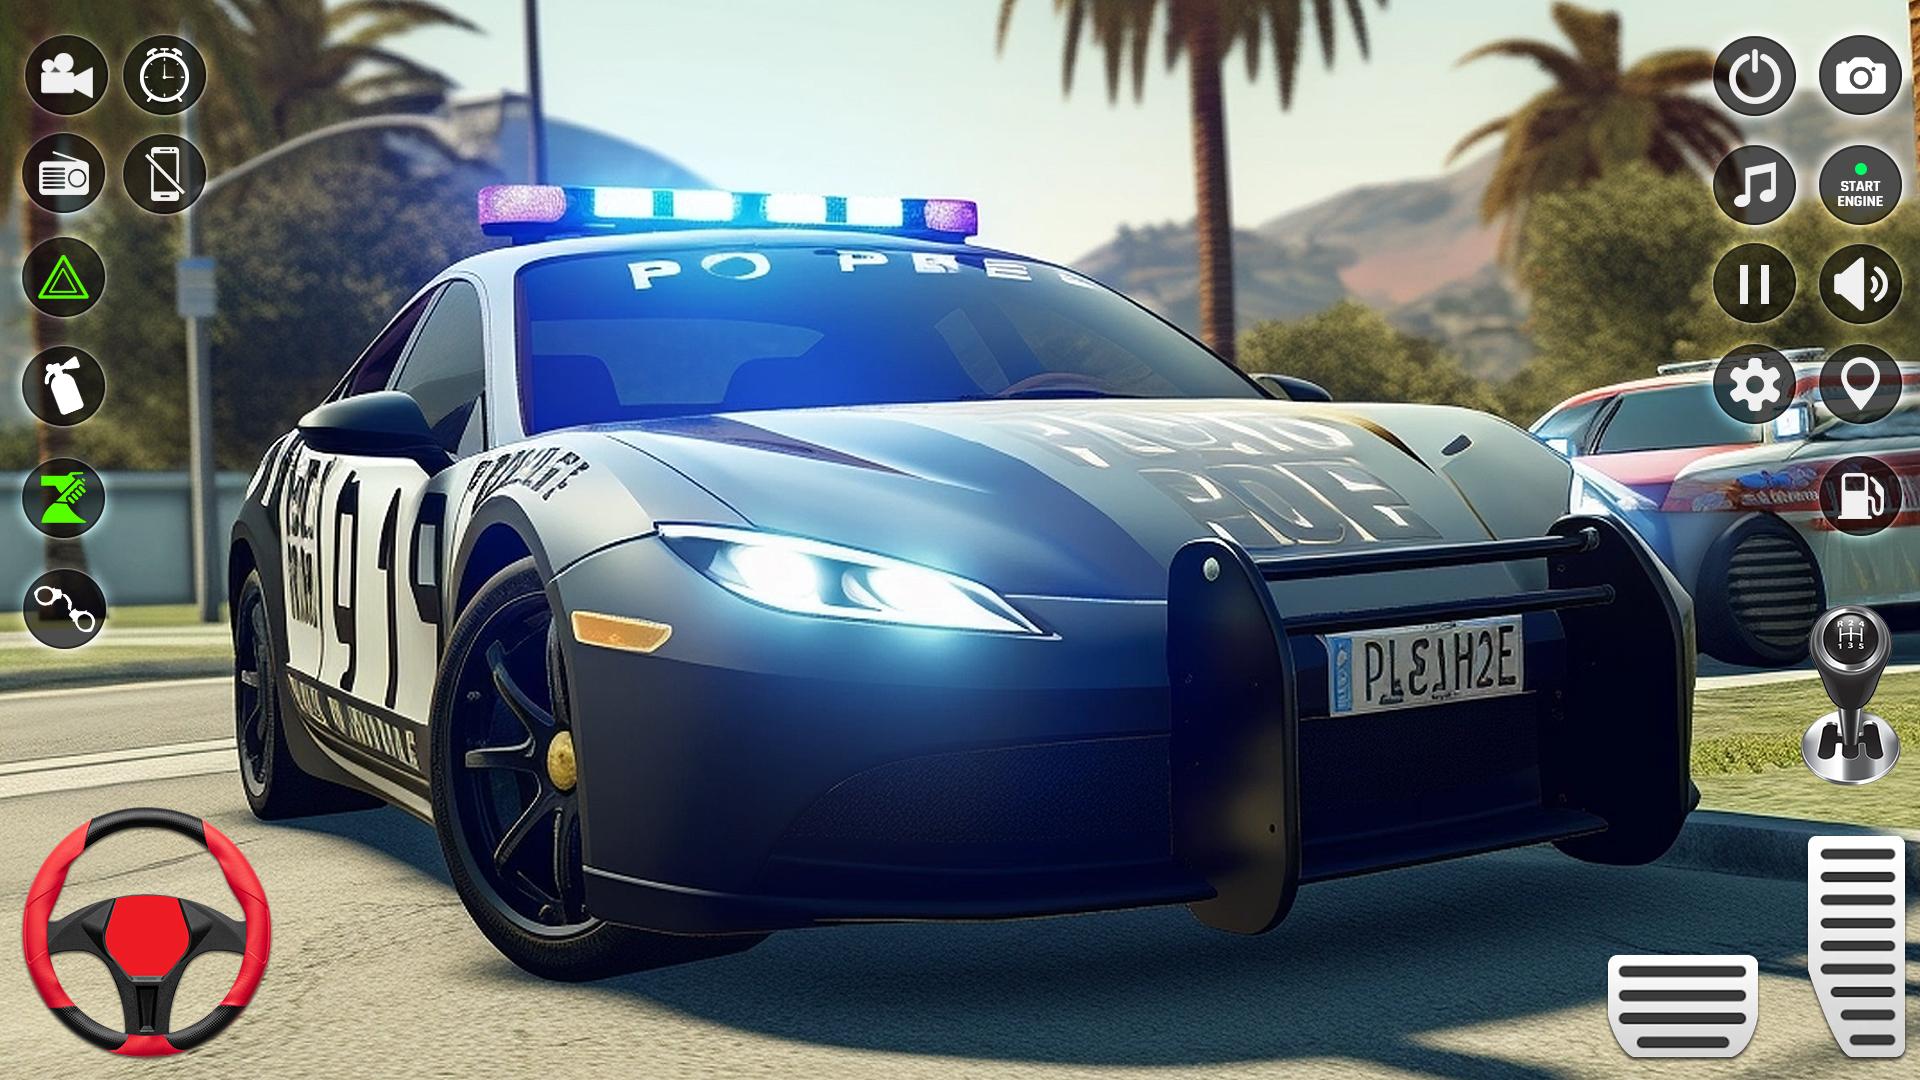 Play NYPD Police Car Driving Games Online for Free on PC & Mobile